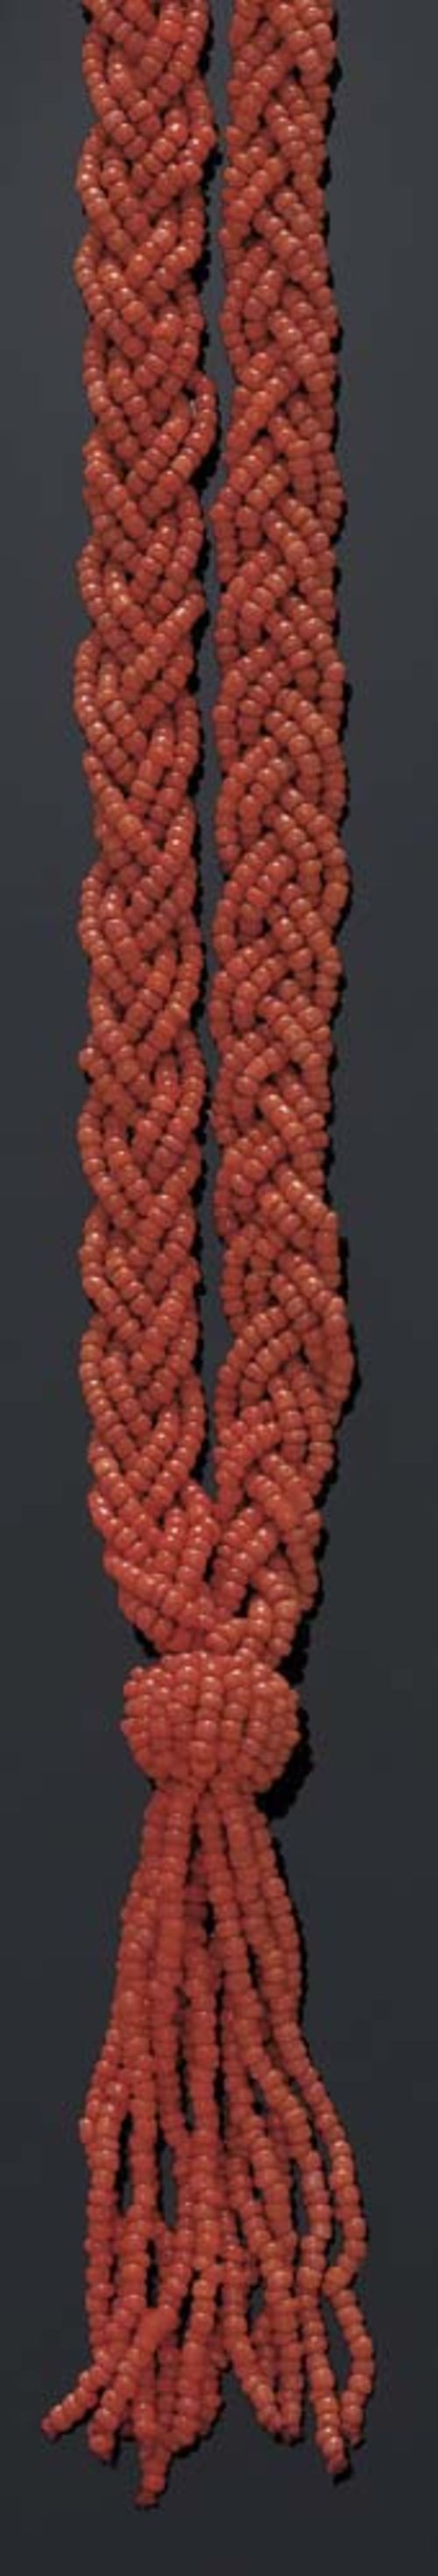 CORAL SAUTOIR WITH BRACELET, ca 1910. Bracelet fastener yellow gold. Long, double-row necklace with a braid pattern and ending in a tassel, with numerous small orange-red coral beads, L ca. 75 cm. Matching breaded bracelet made of small coral beads, W 3.3 and L ca. 17 cm.